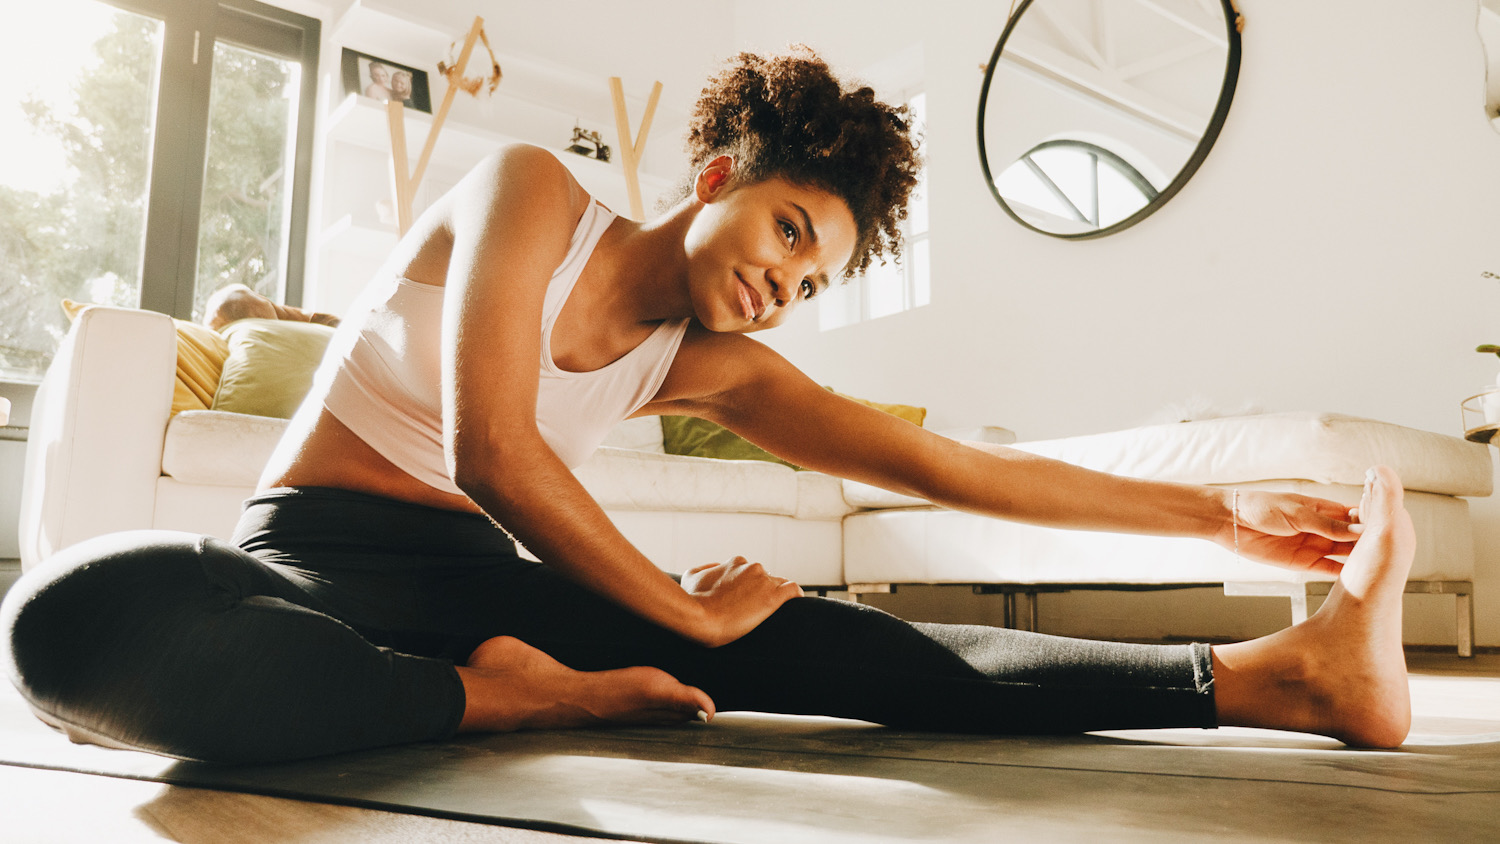 Photo shows a woman stretching on a yoga mat in a home setting. Gift the gift of self care this holiday season.